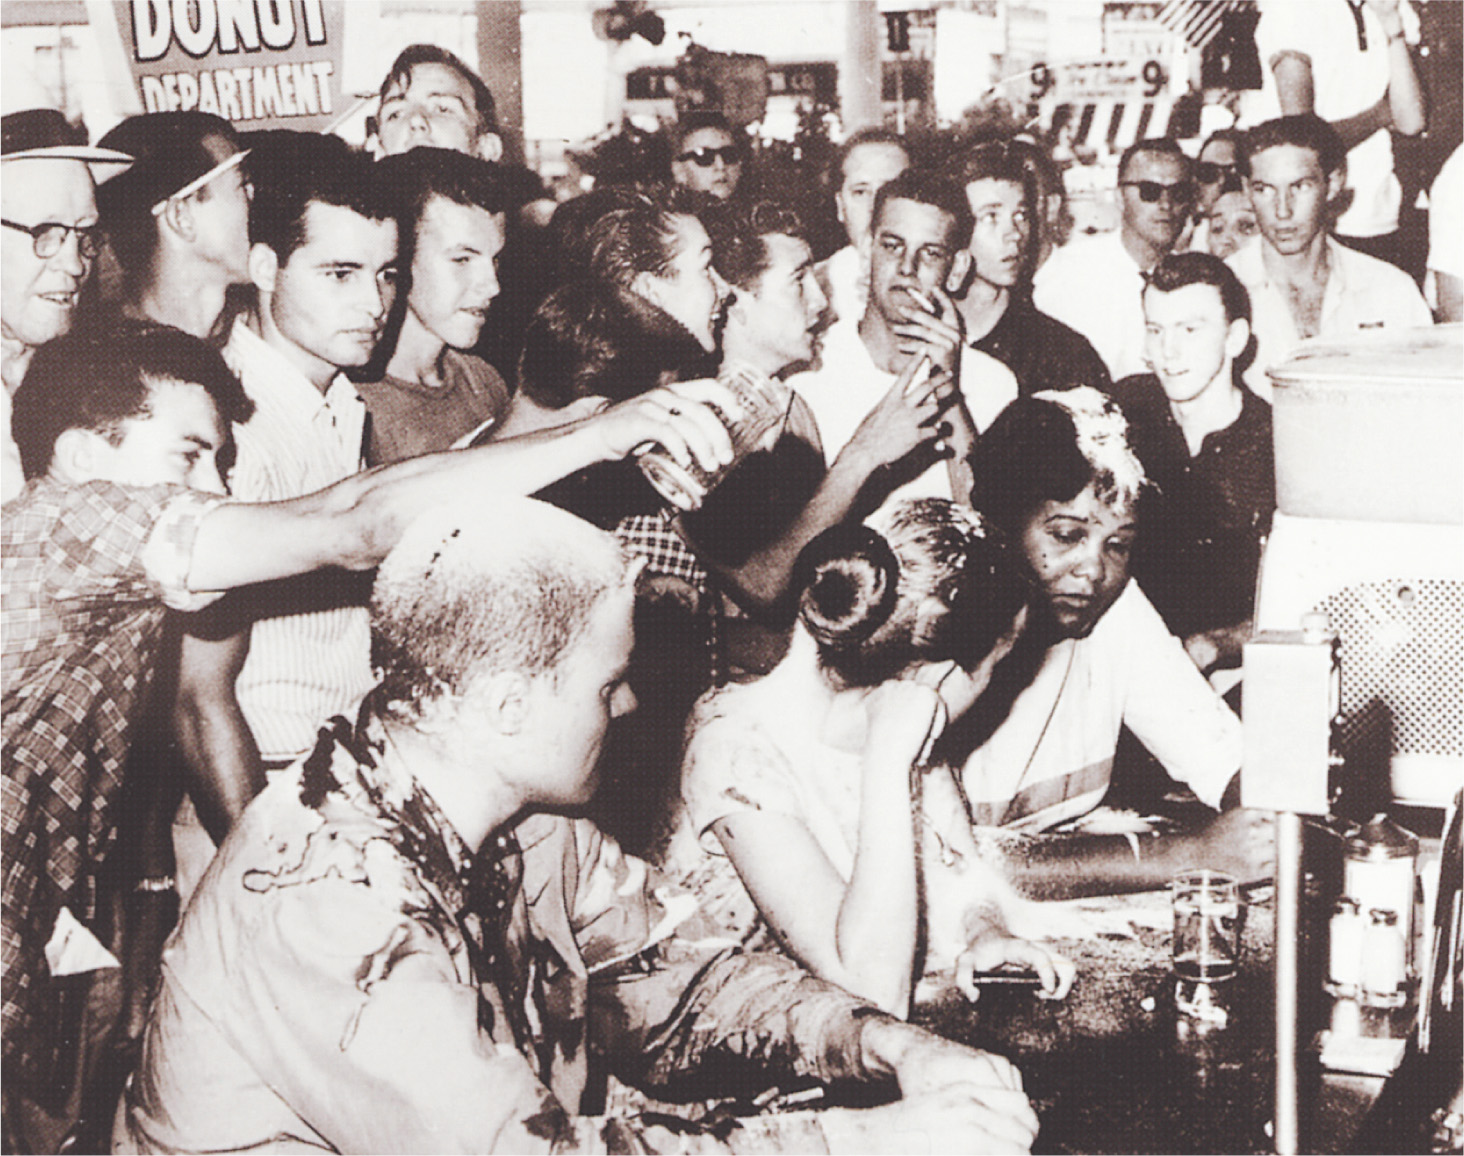 photo: a crowd of white people dumps food over African-Americans and whites sitting together at a counter.